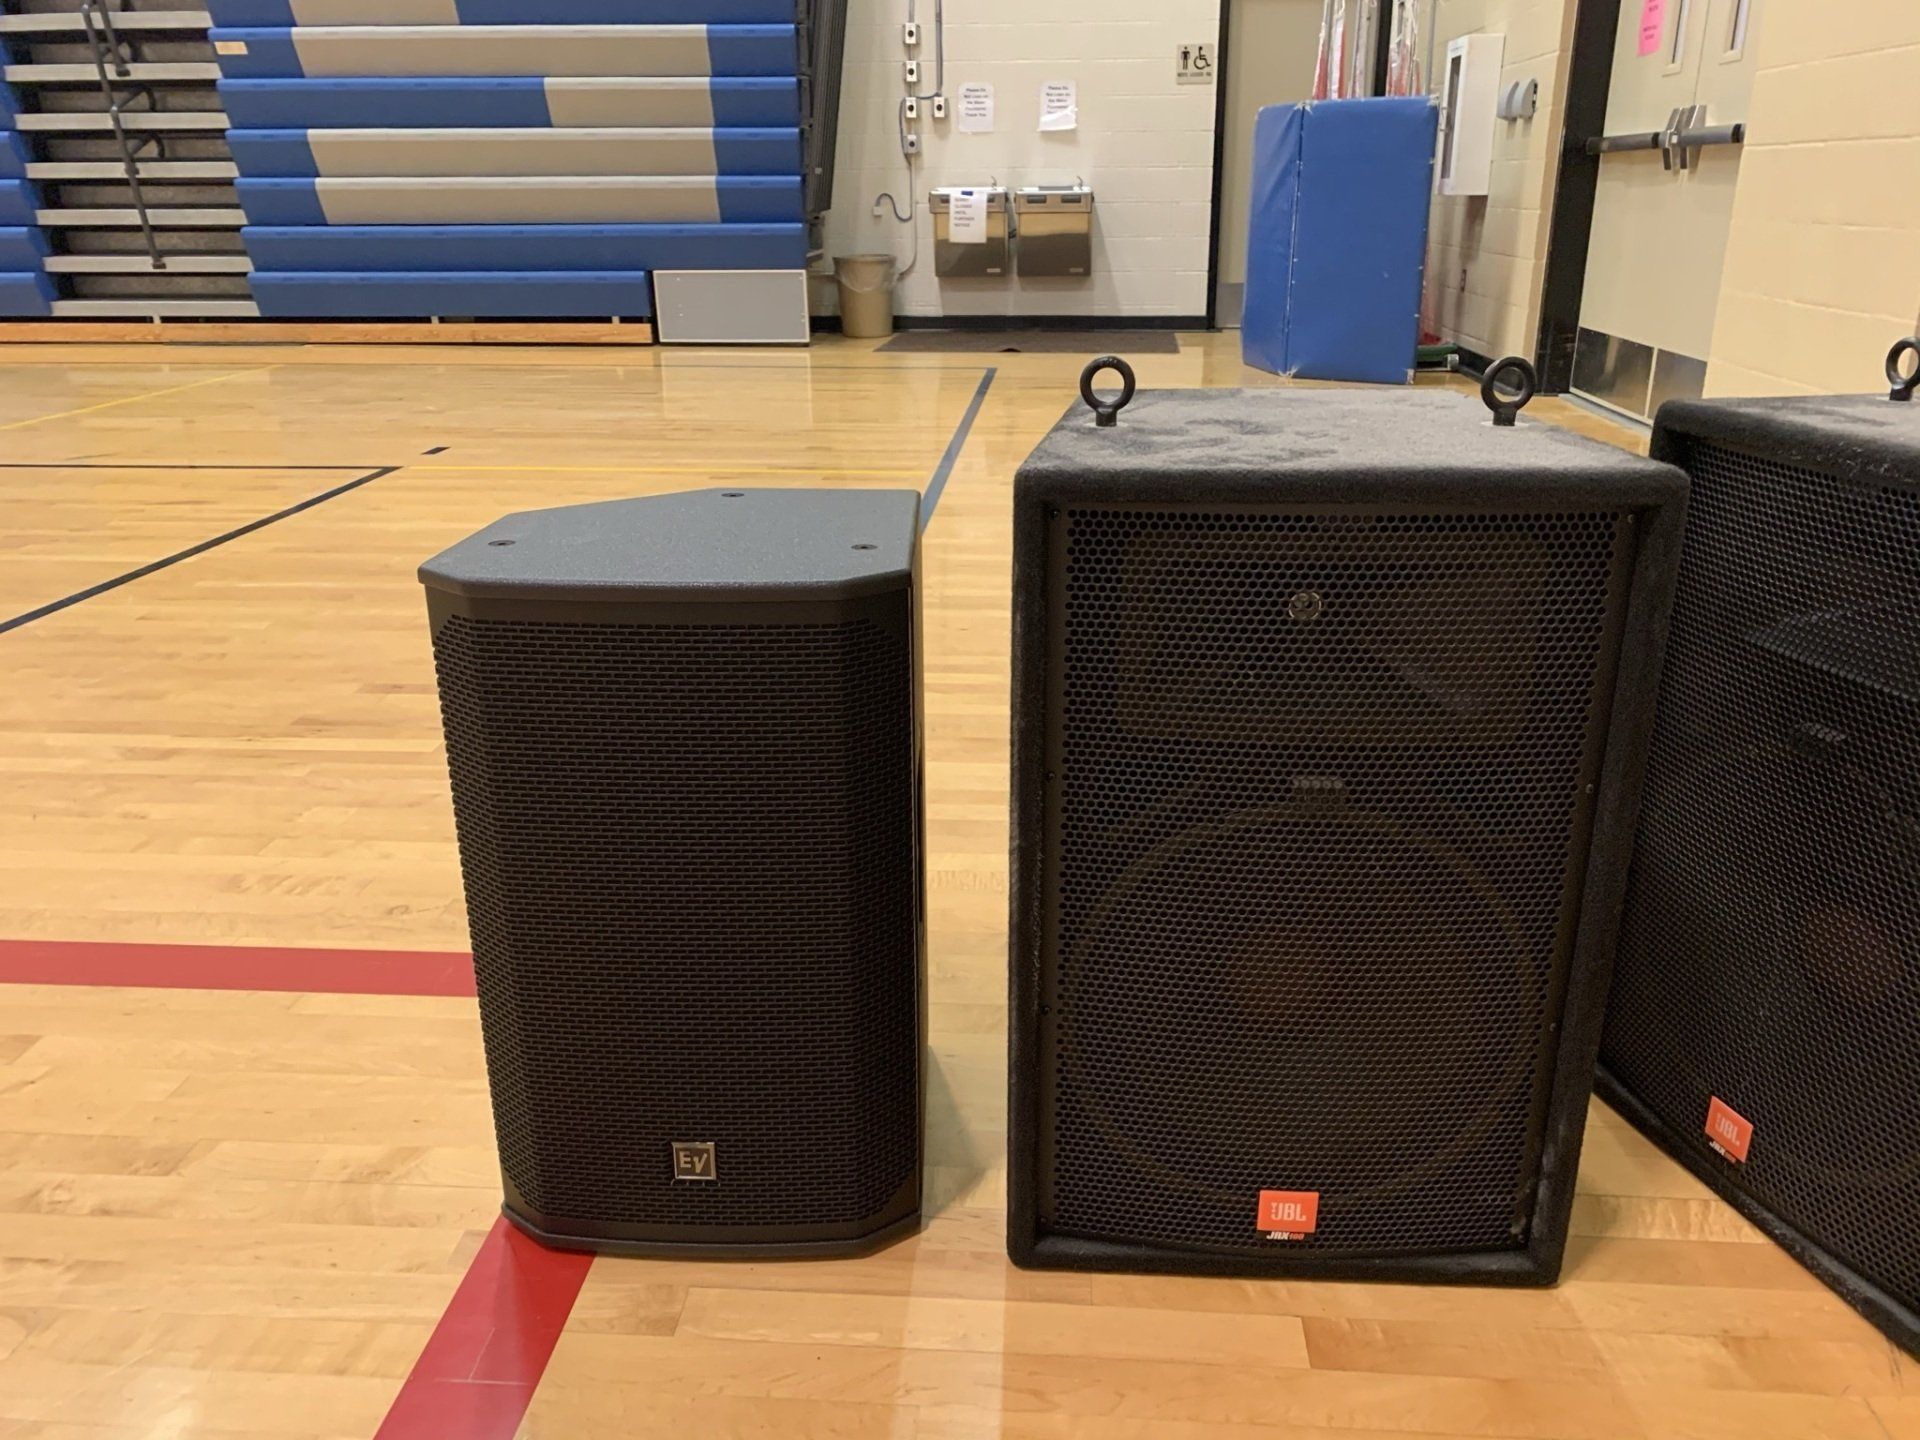 Two speakers are sitting on a wooden floor in a gym.